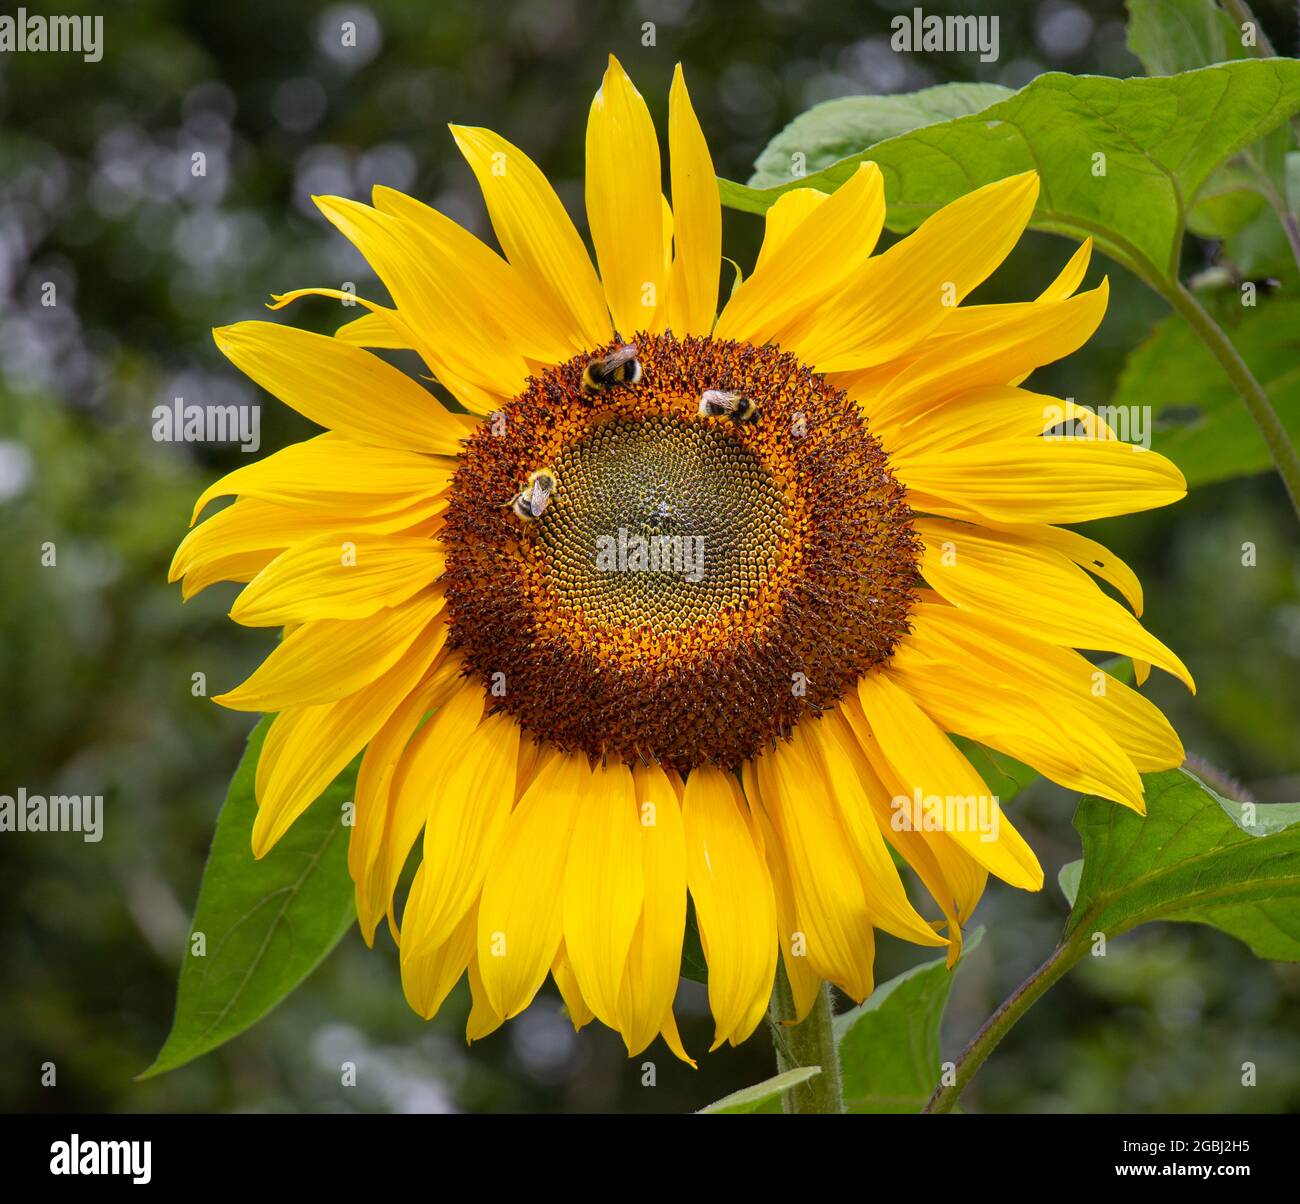 Bumblebee feeding on nectar from a sunflower plant. Stock Photo